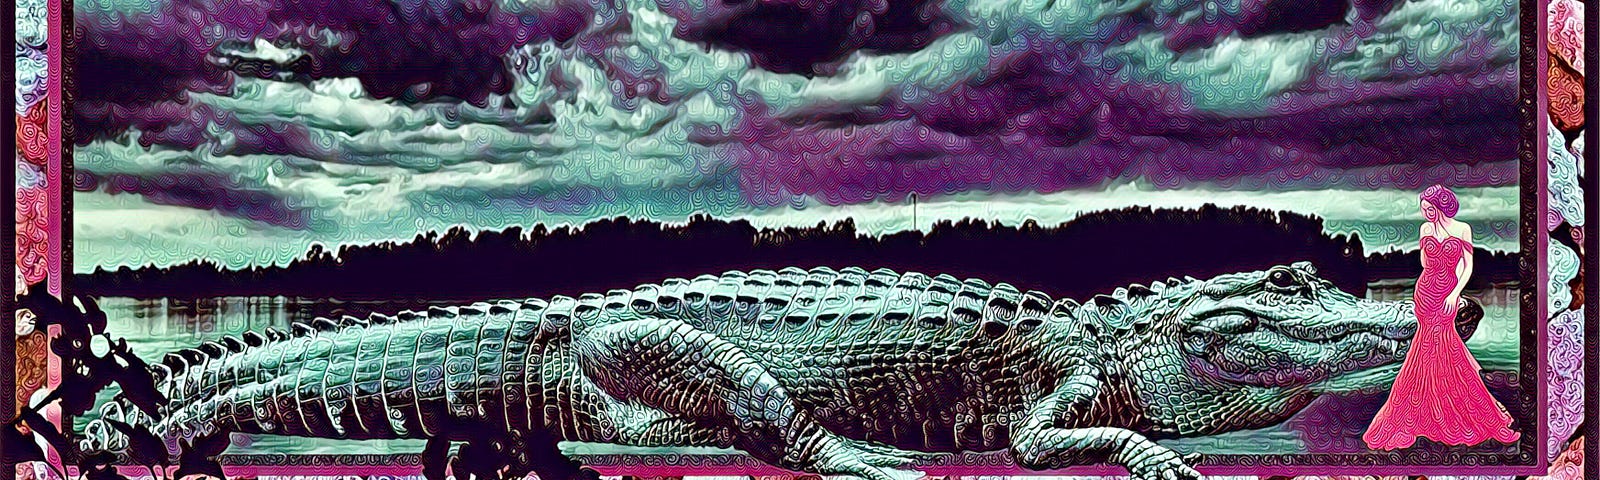 Giant alligator standing next to a woman in a strapless ball gown against a backdrop of pale green and purple clouds